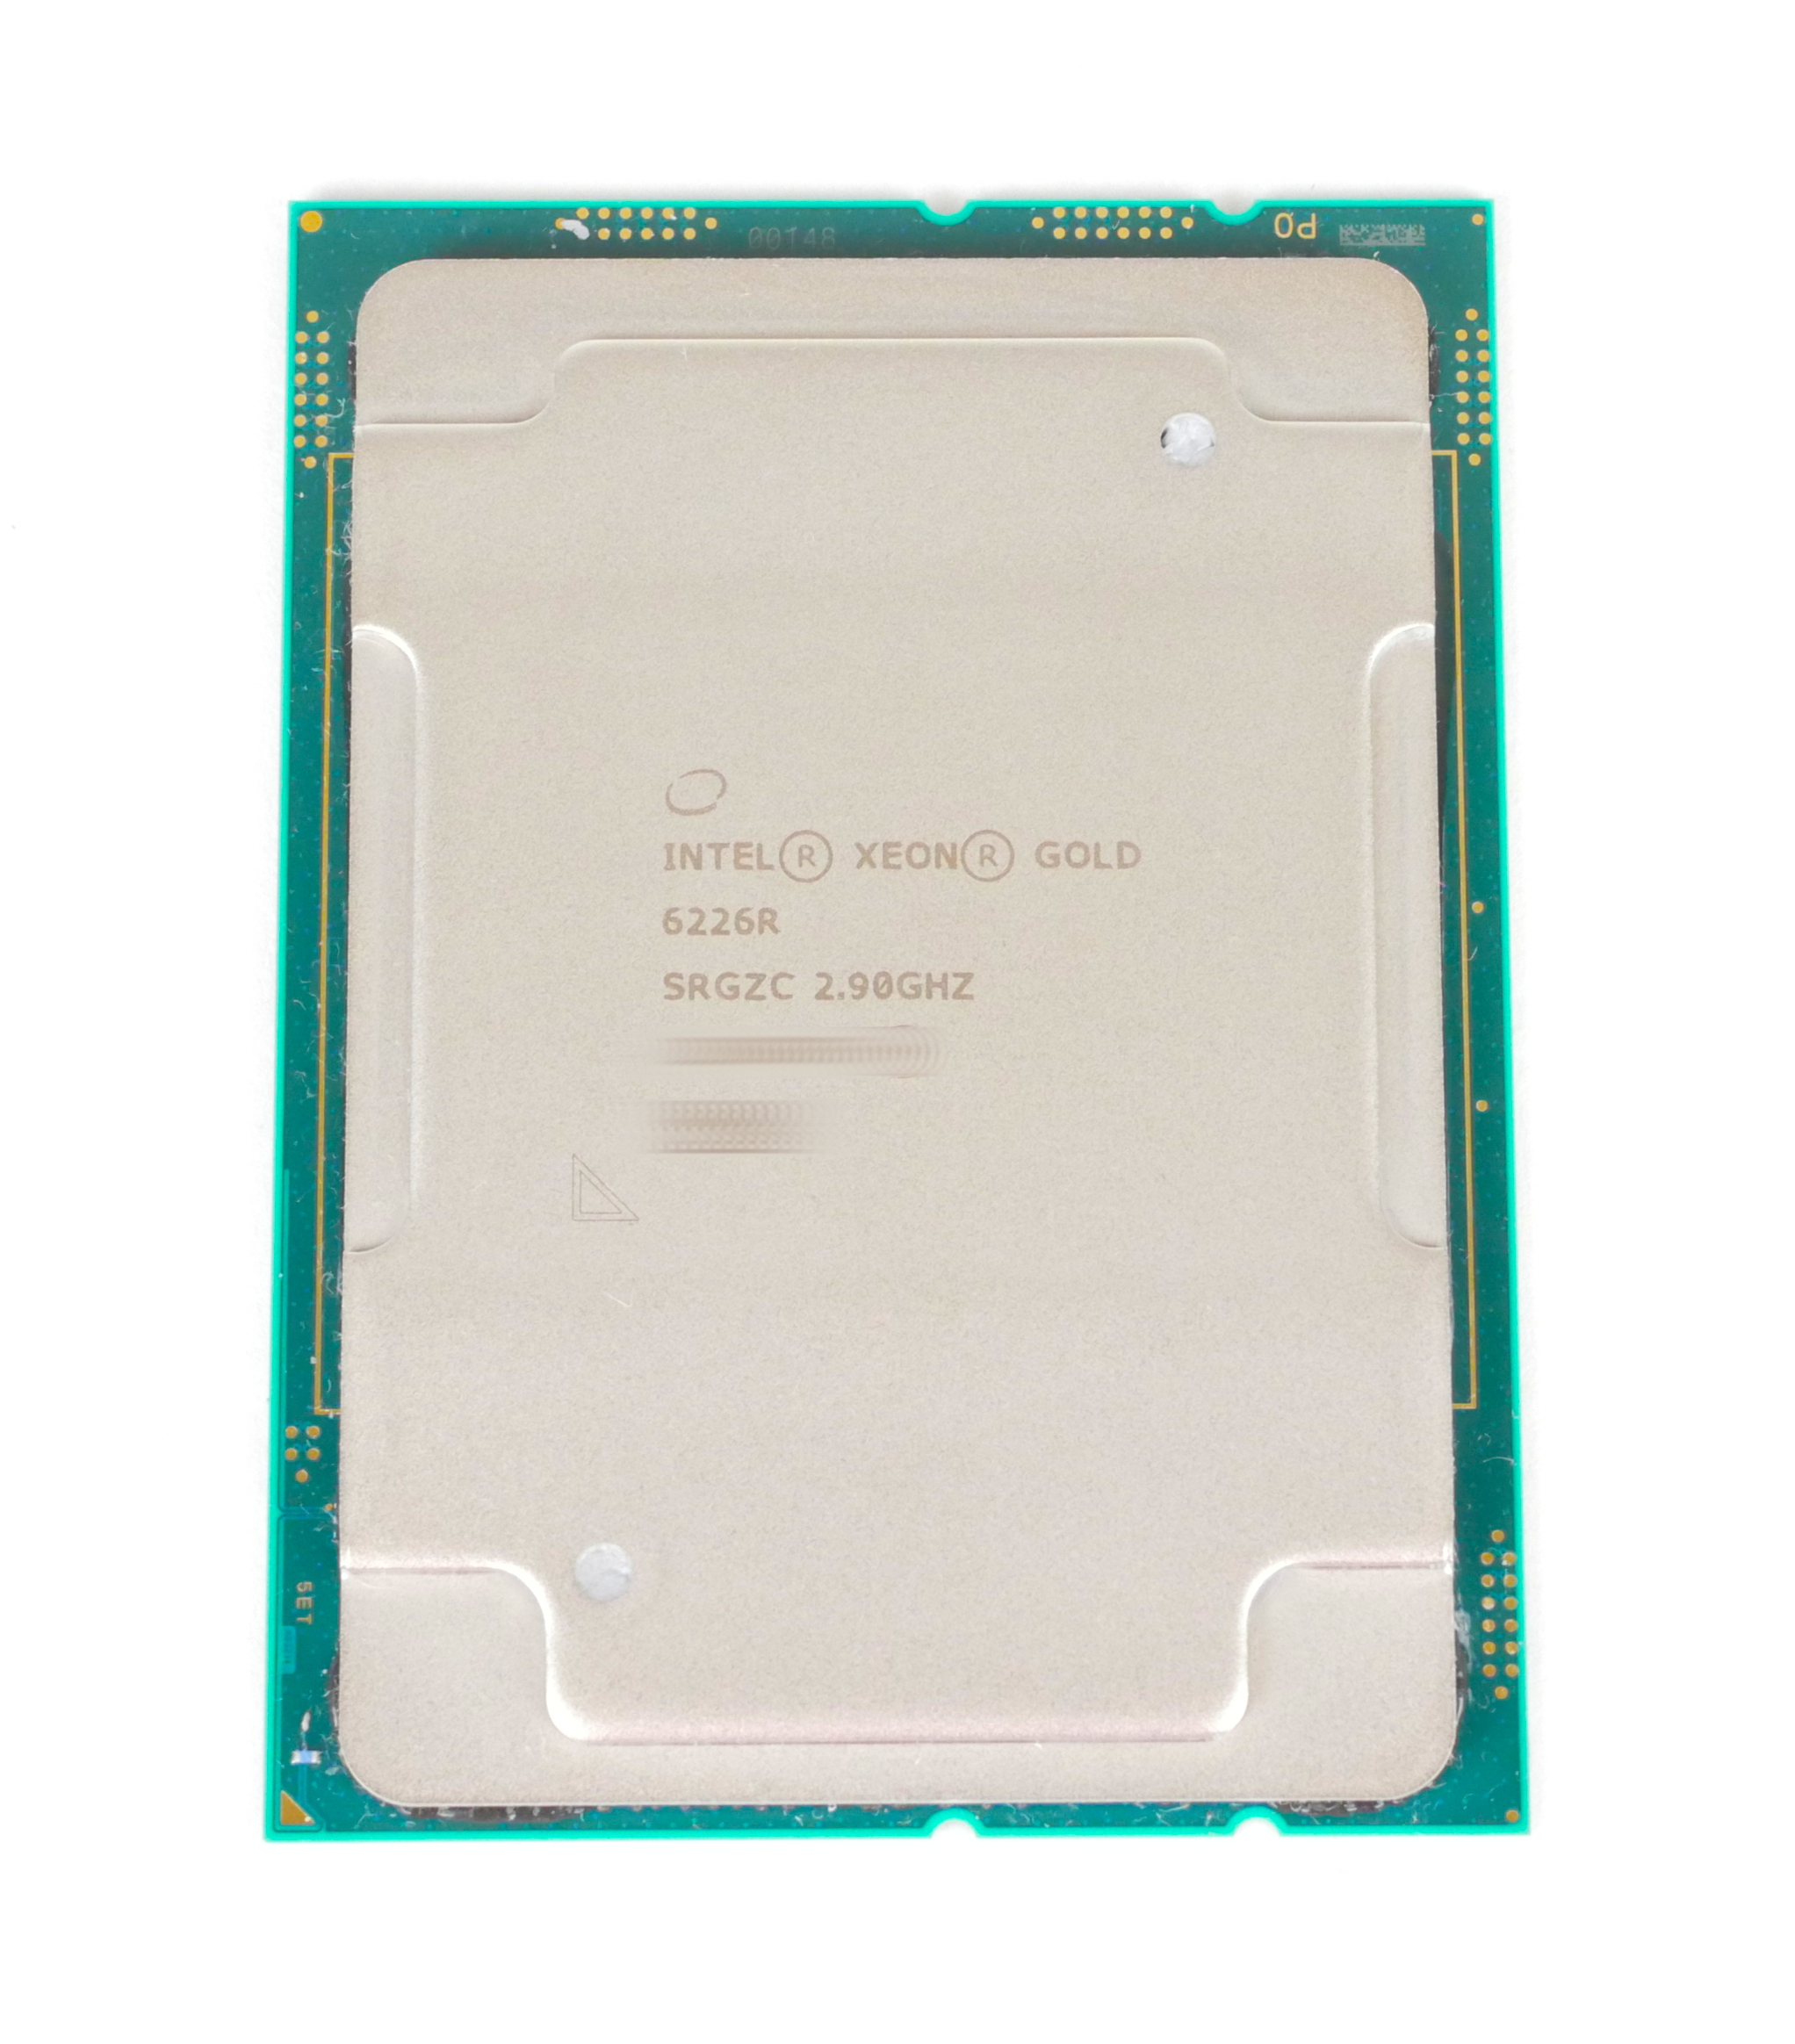 Intel Xeon Gold 6226R 2.9Ghz 16C 32T 22M Cache Socket FCLGA3647 SRGZC P24467-B21 - Click Image to Close